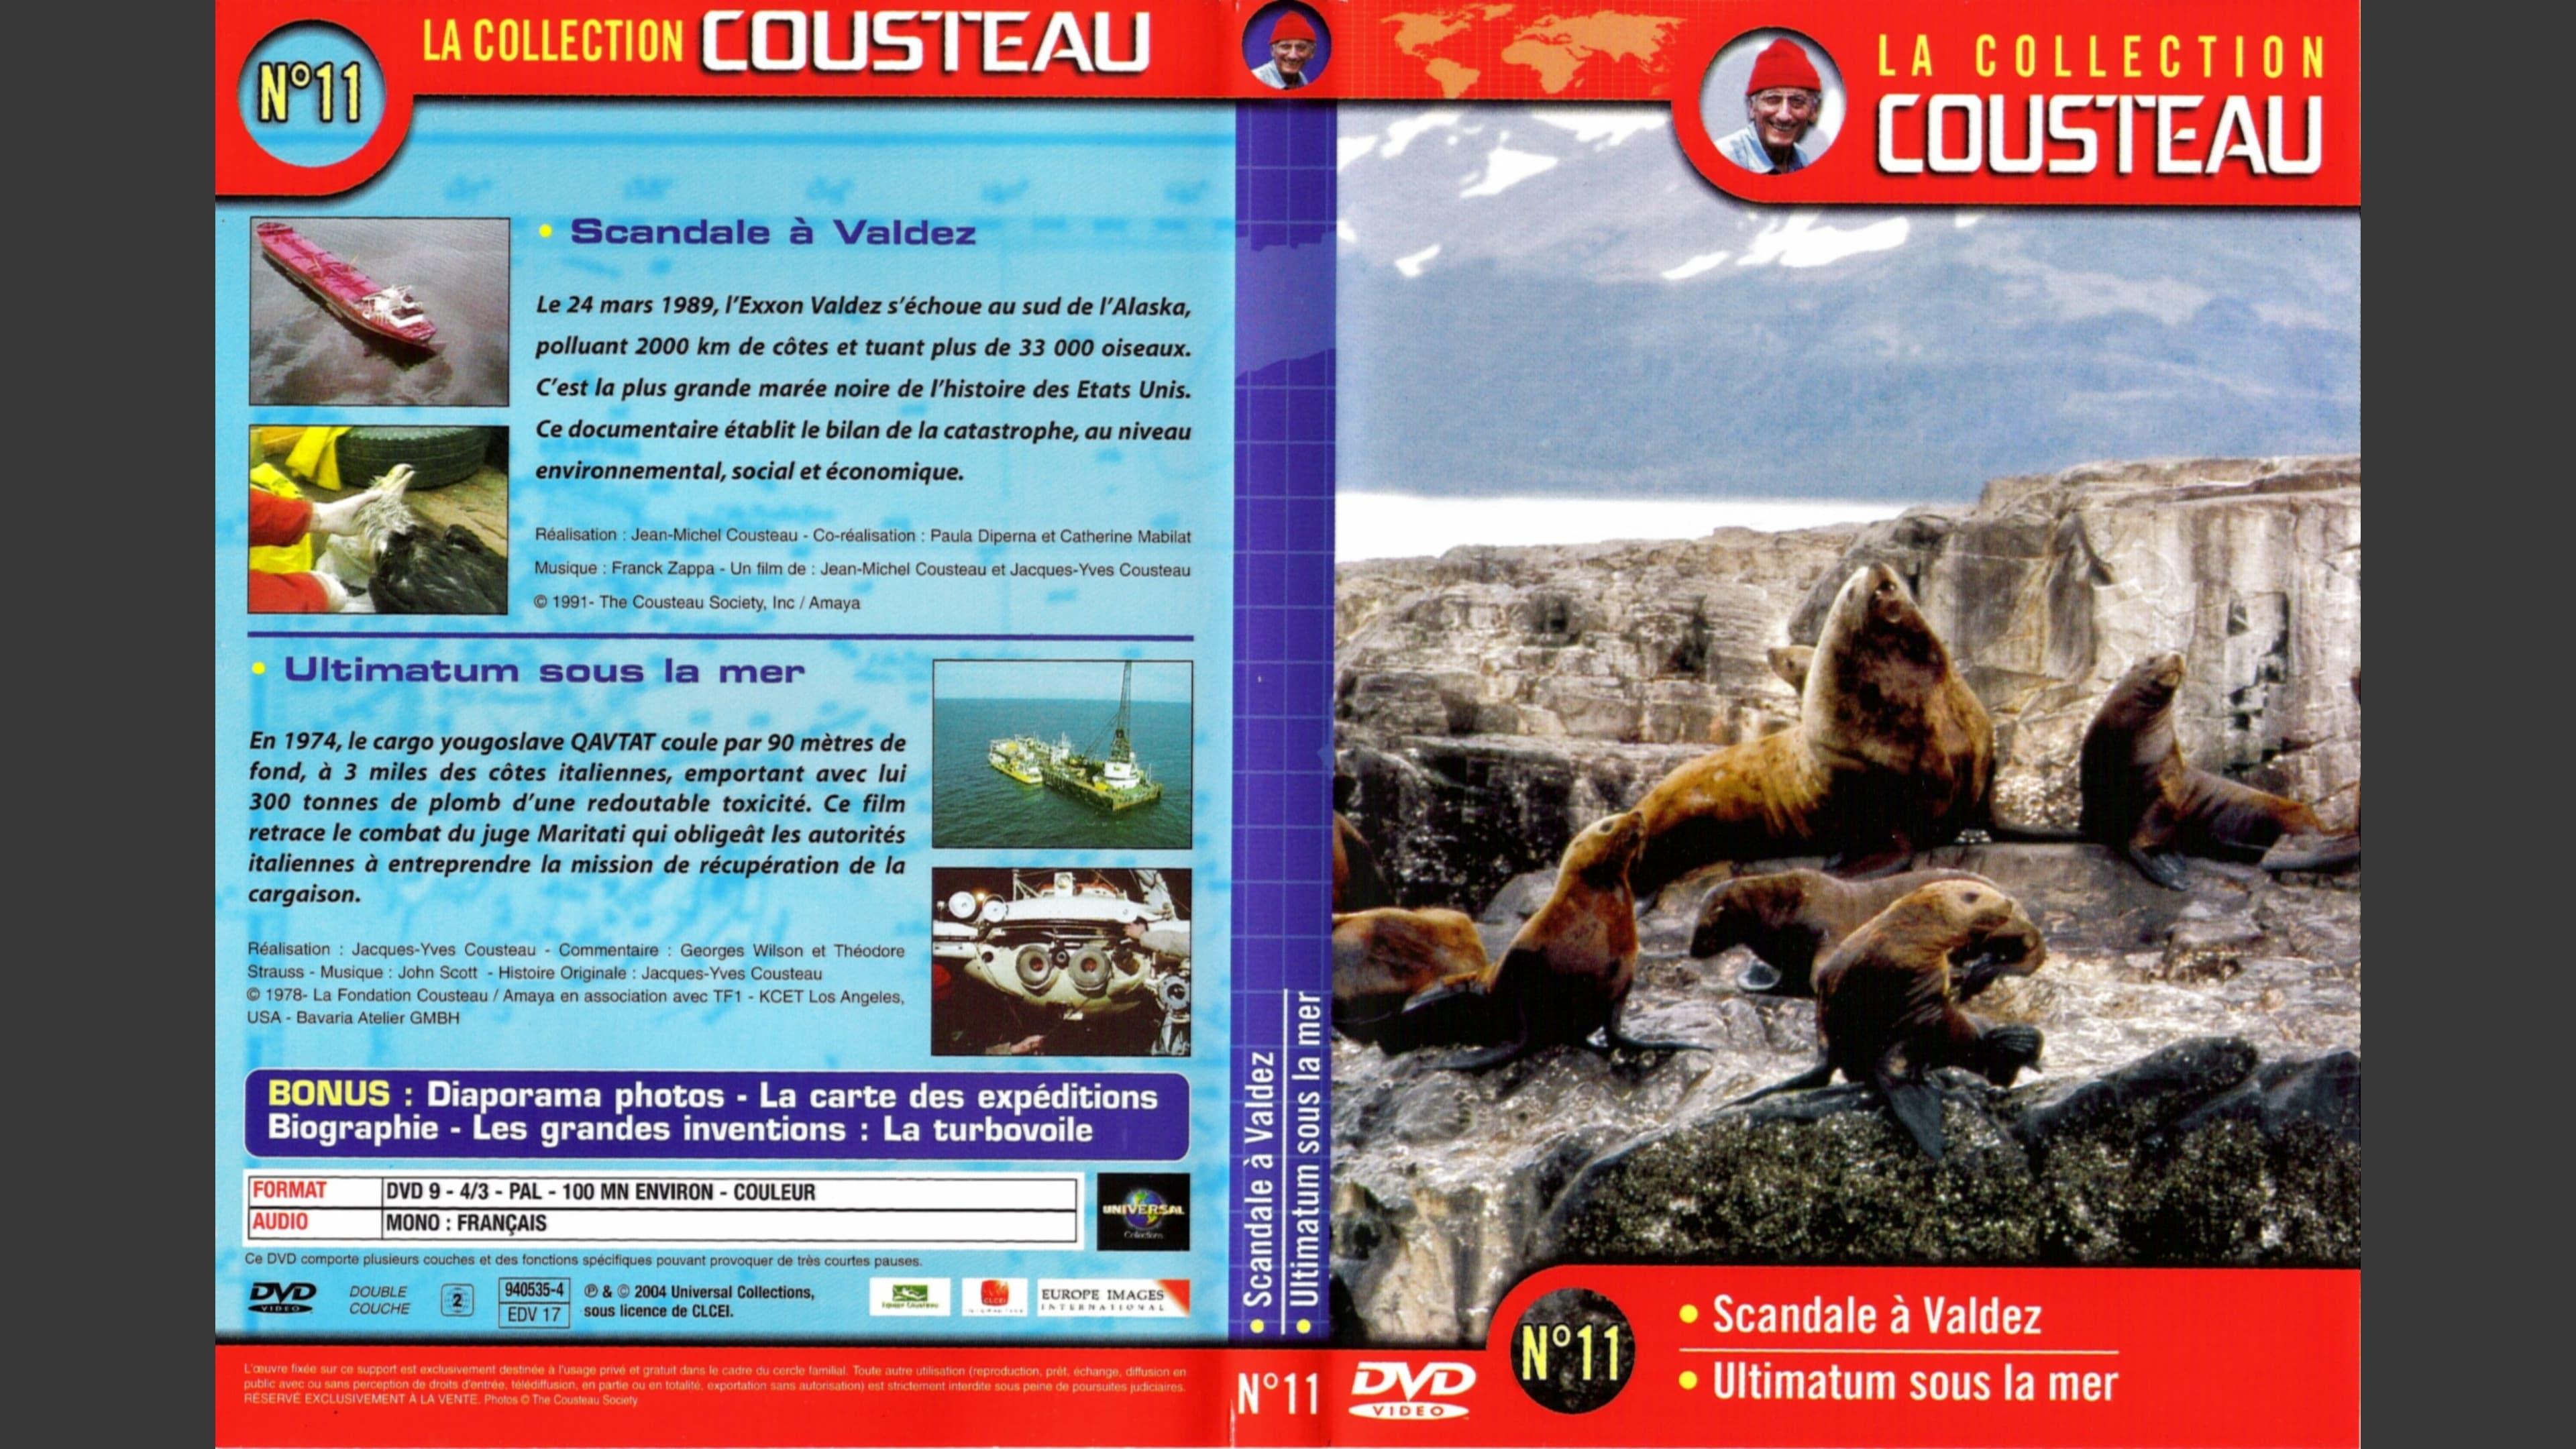 The Cousteau Collection N°11-1 | Scandal in Valdez